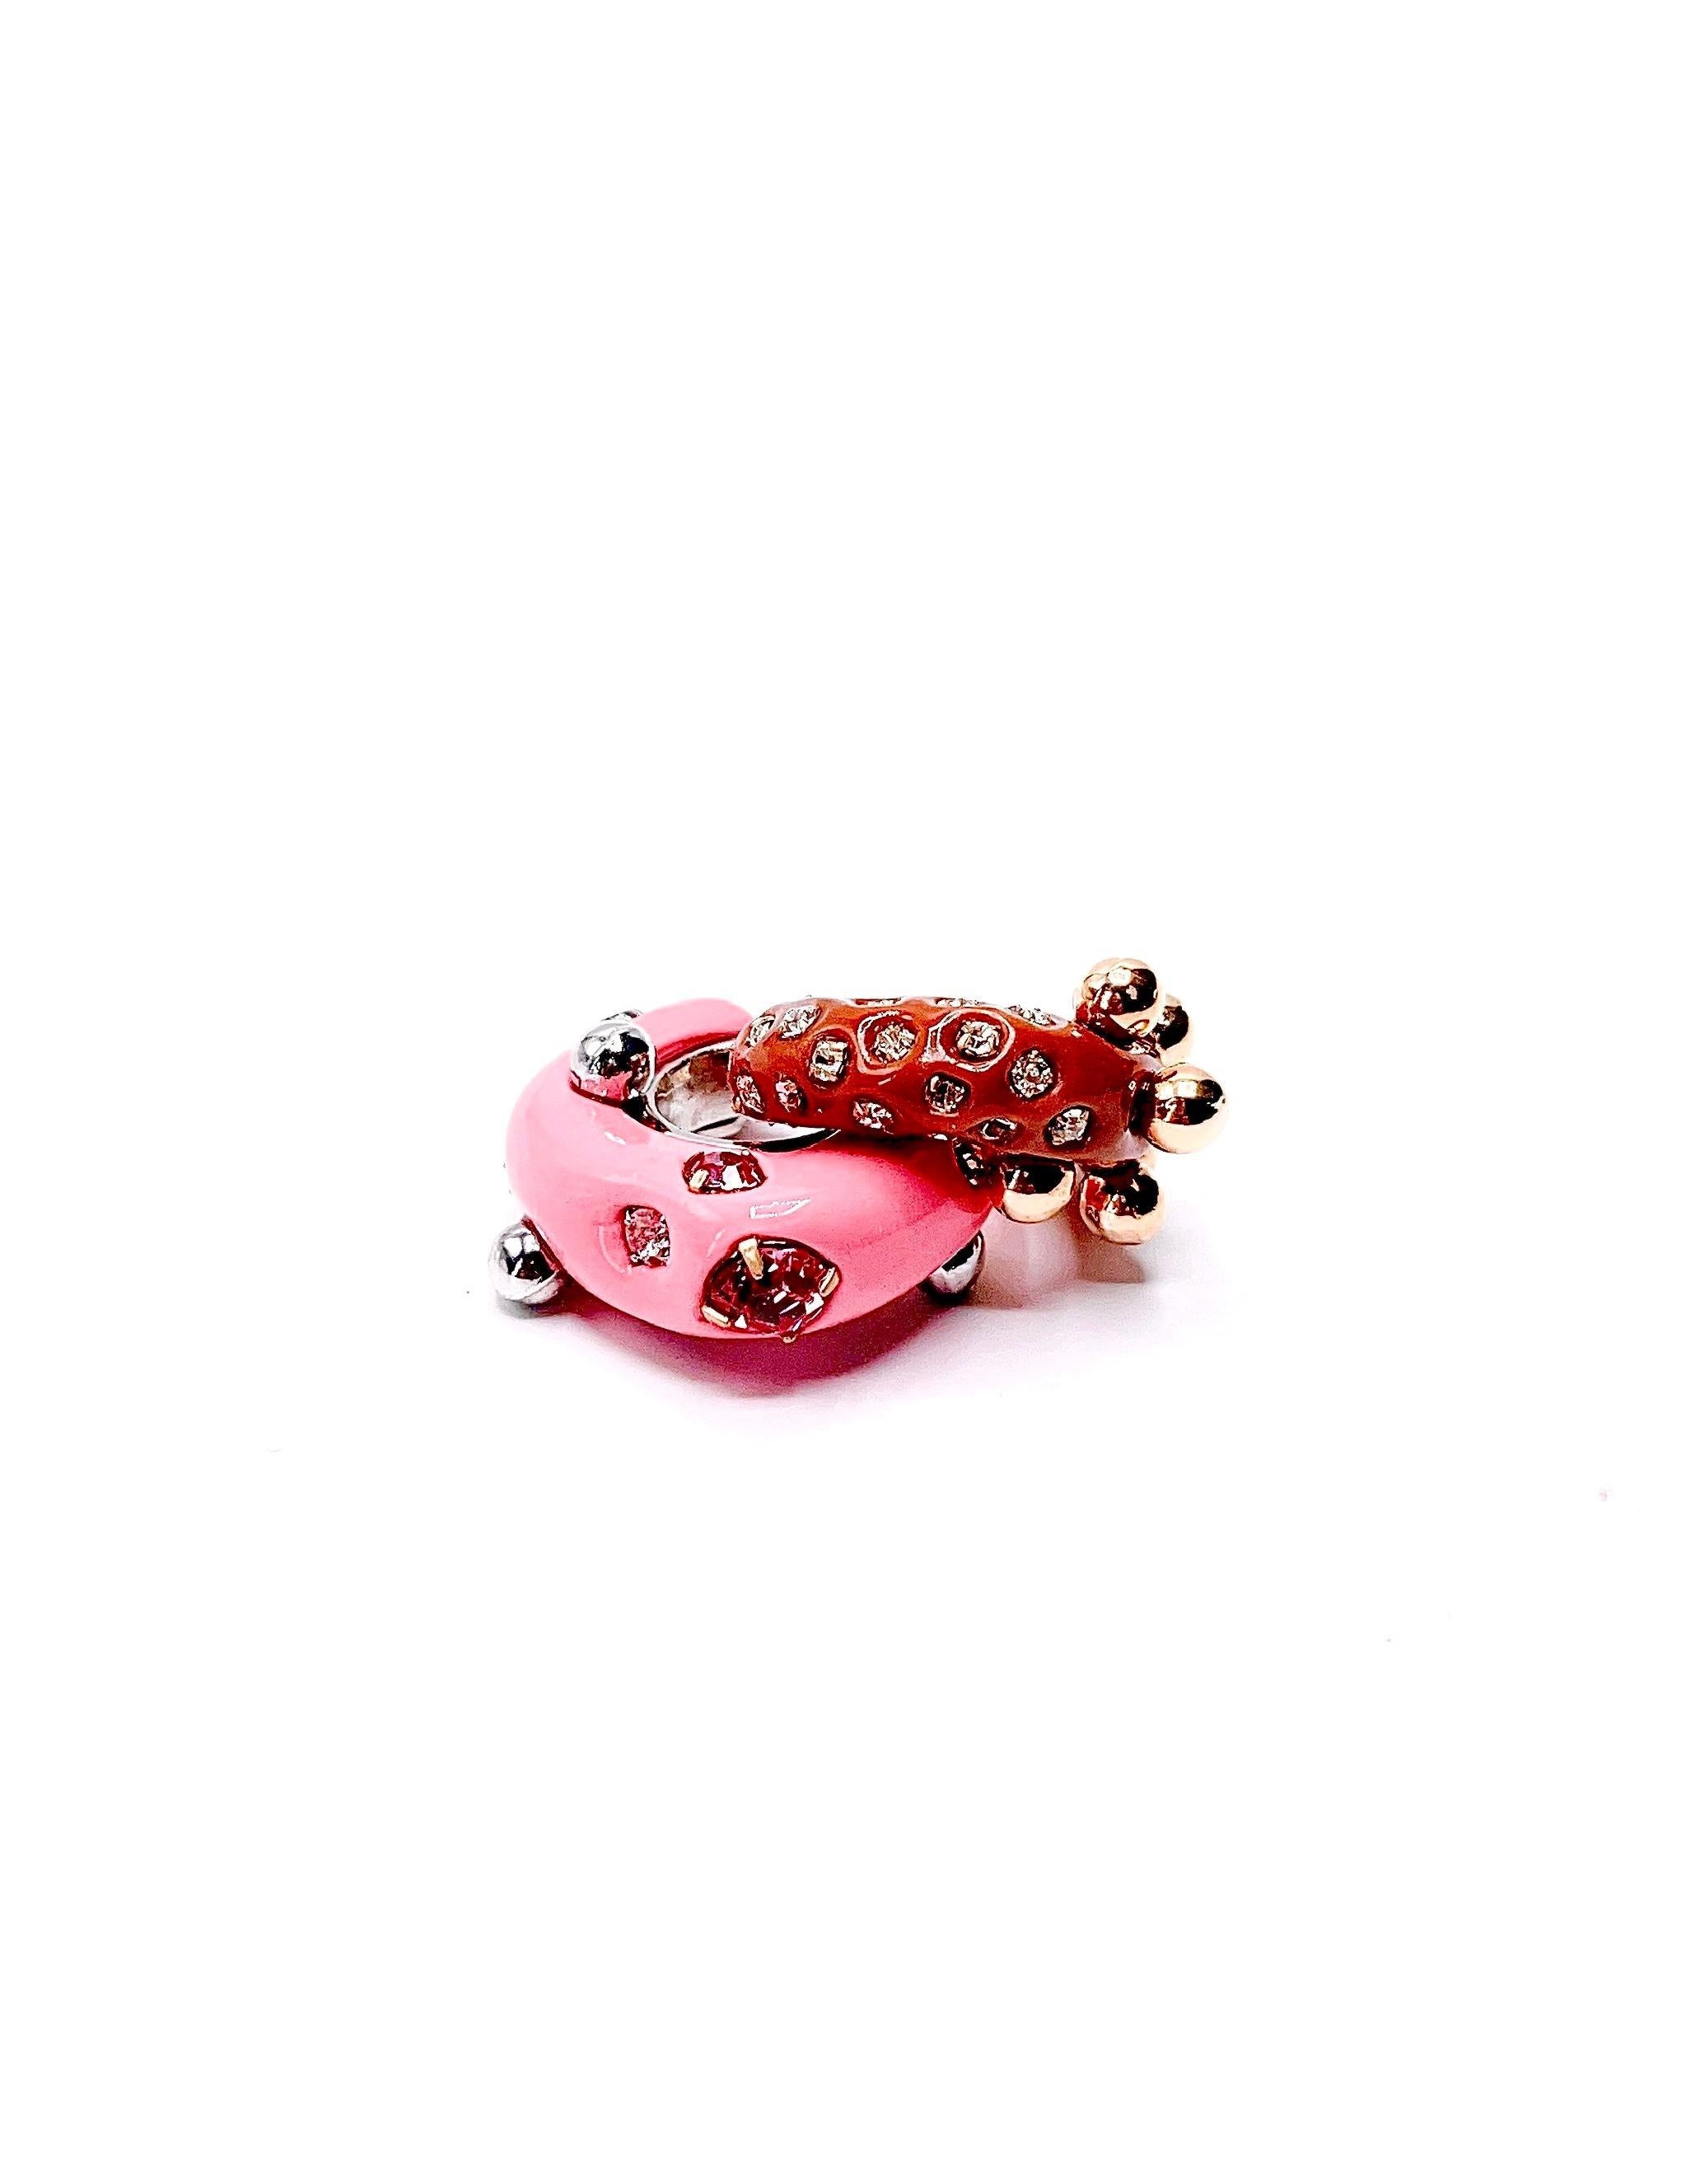 Women's or Men's TEARDROPS in a Diary, No. 6_in Pink_Hand carfted Ear cuff For Sale